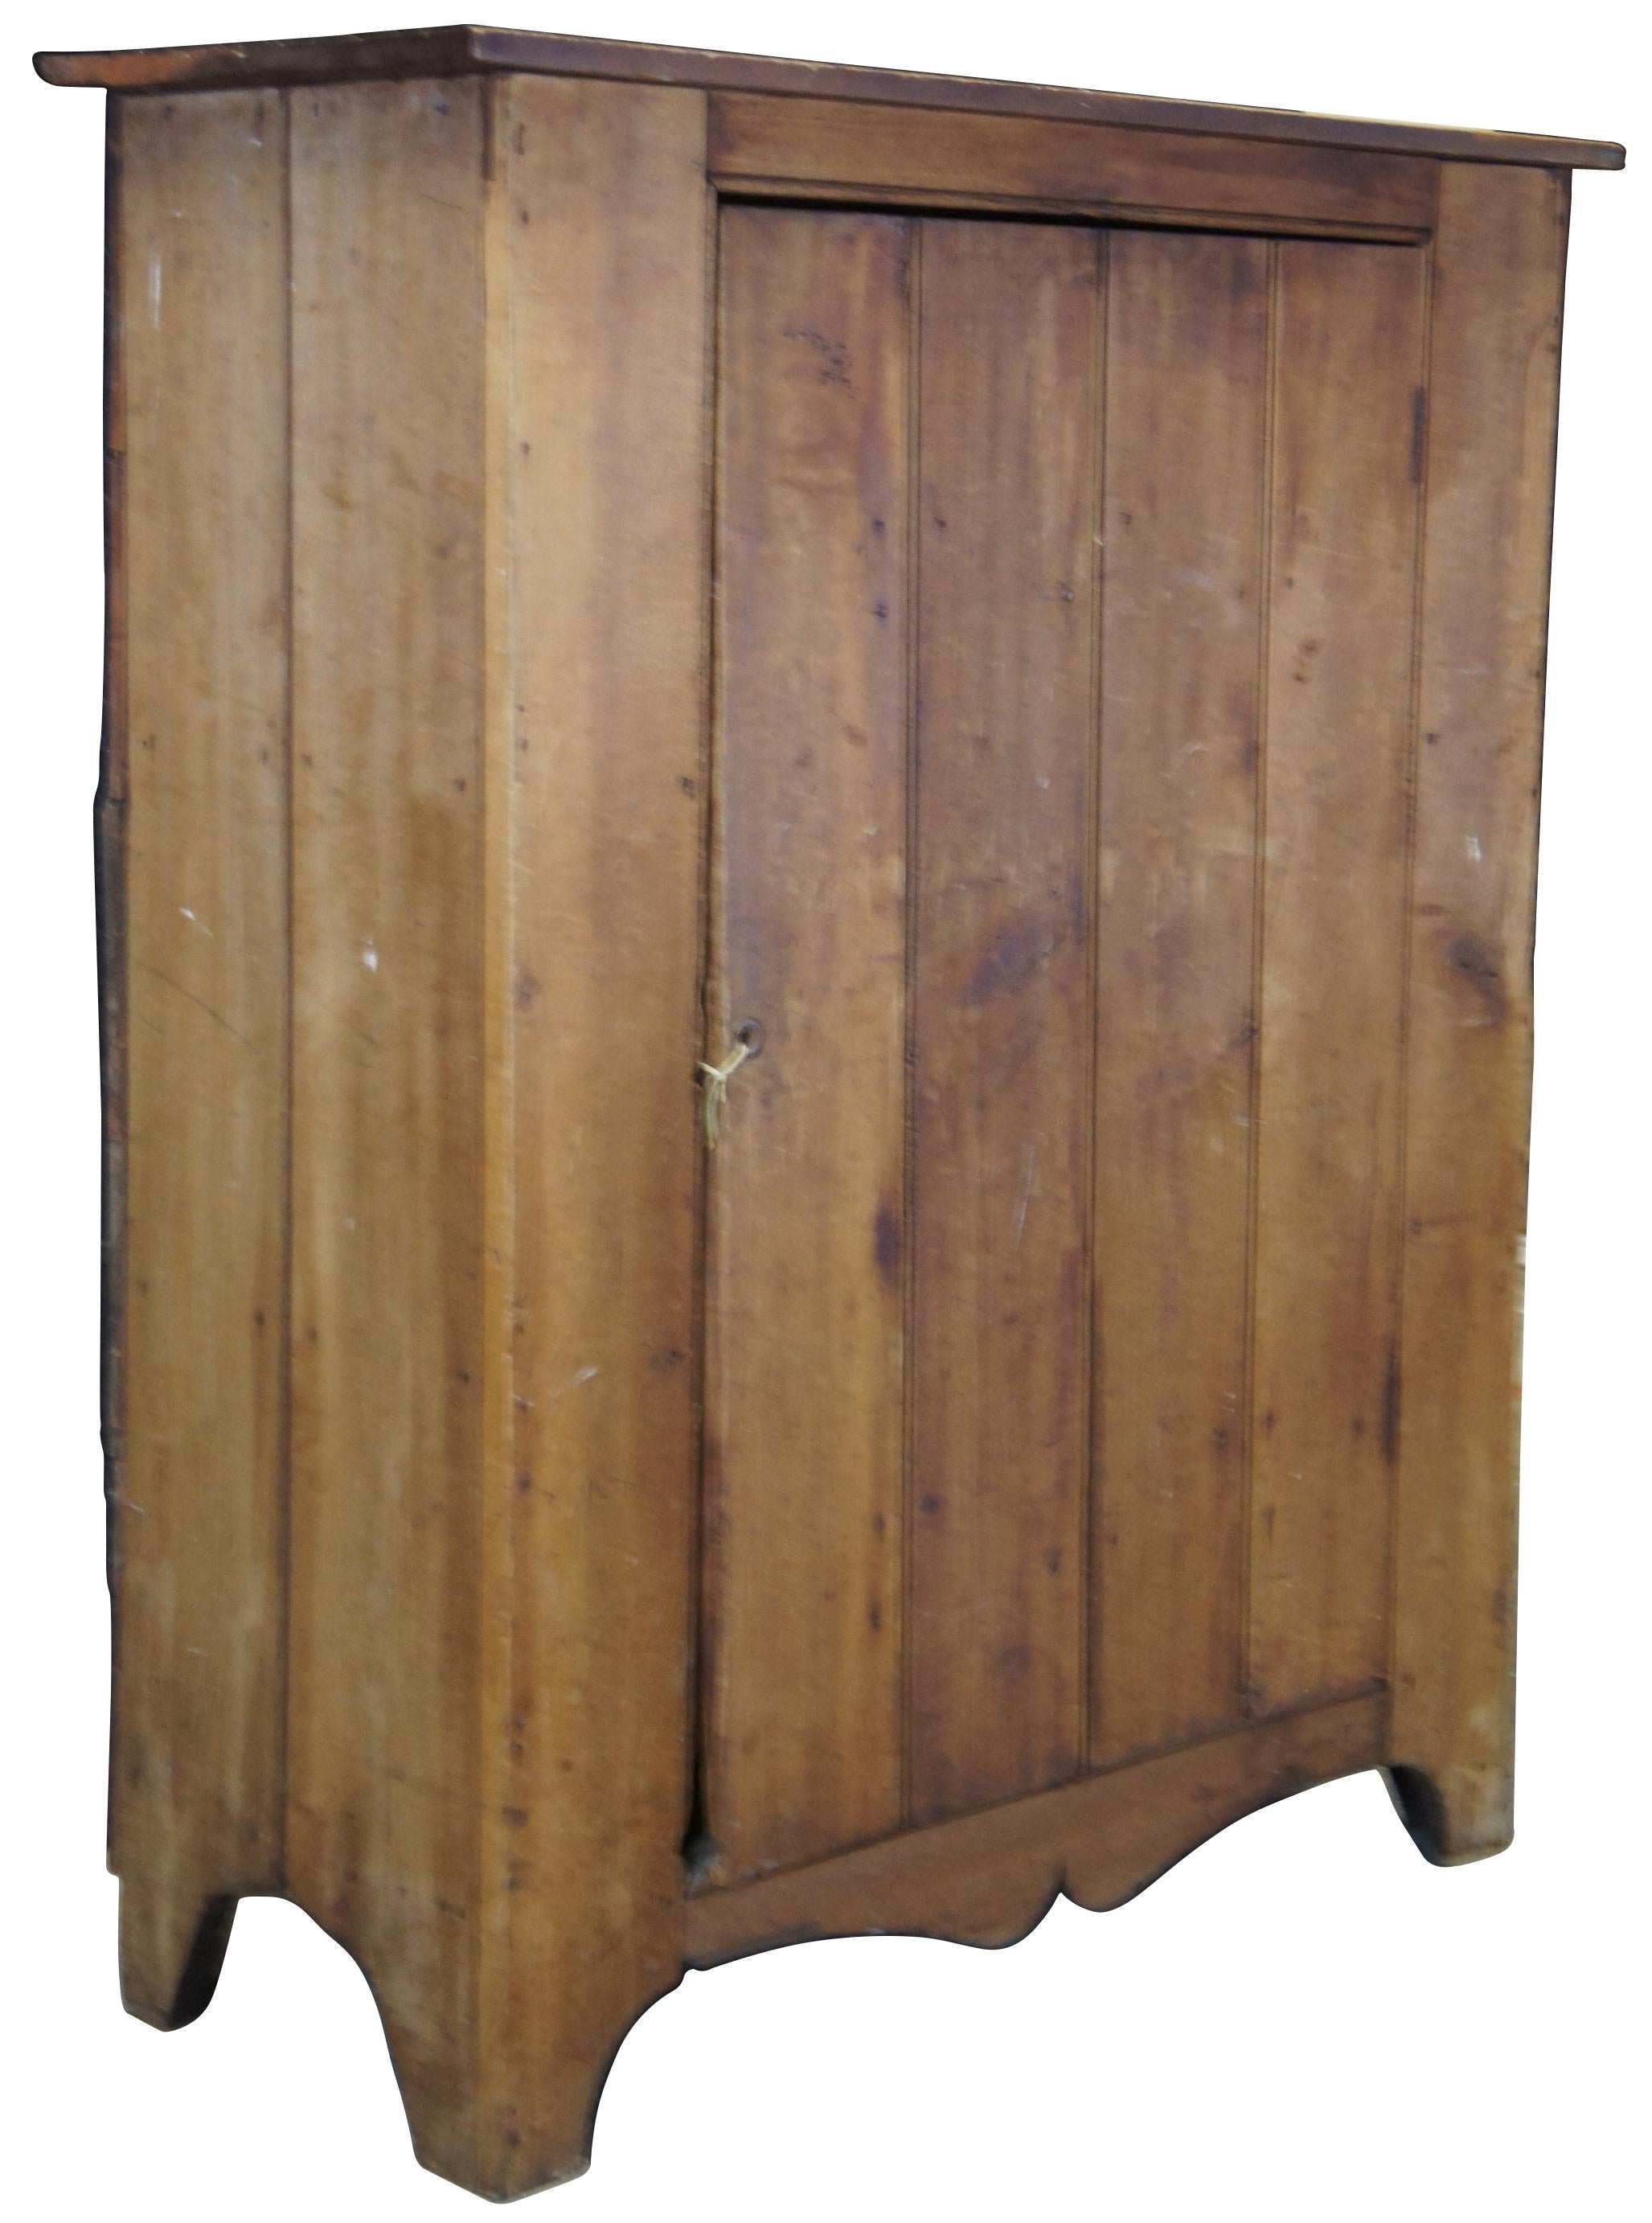 Antique 19th century Pennylvania Pine jelly cabinet or cupboard. Features a low profile withe large door that opens to three shelves.
    